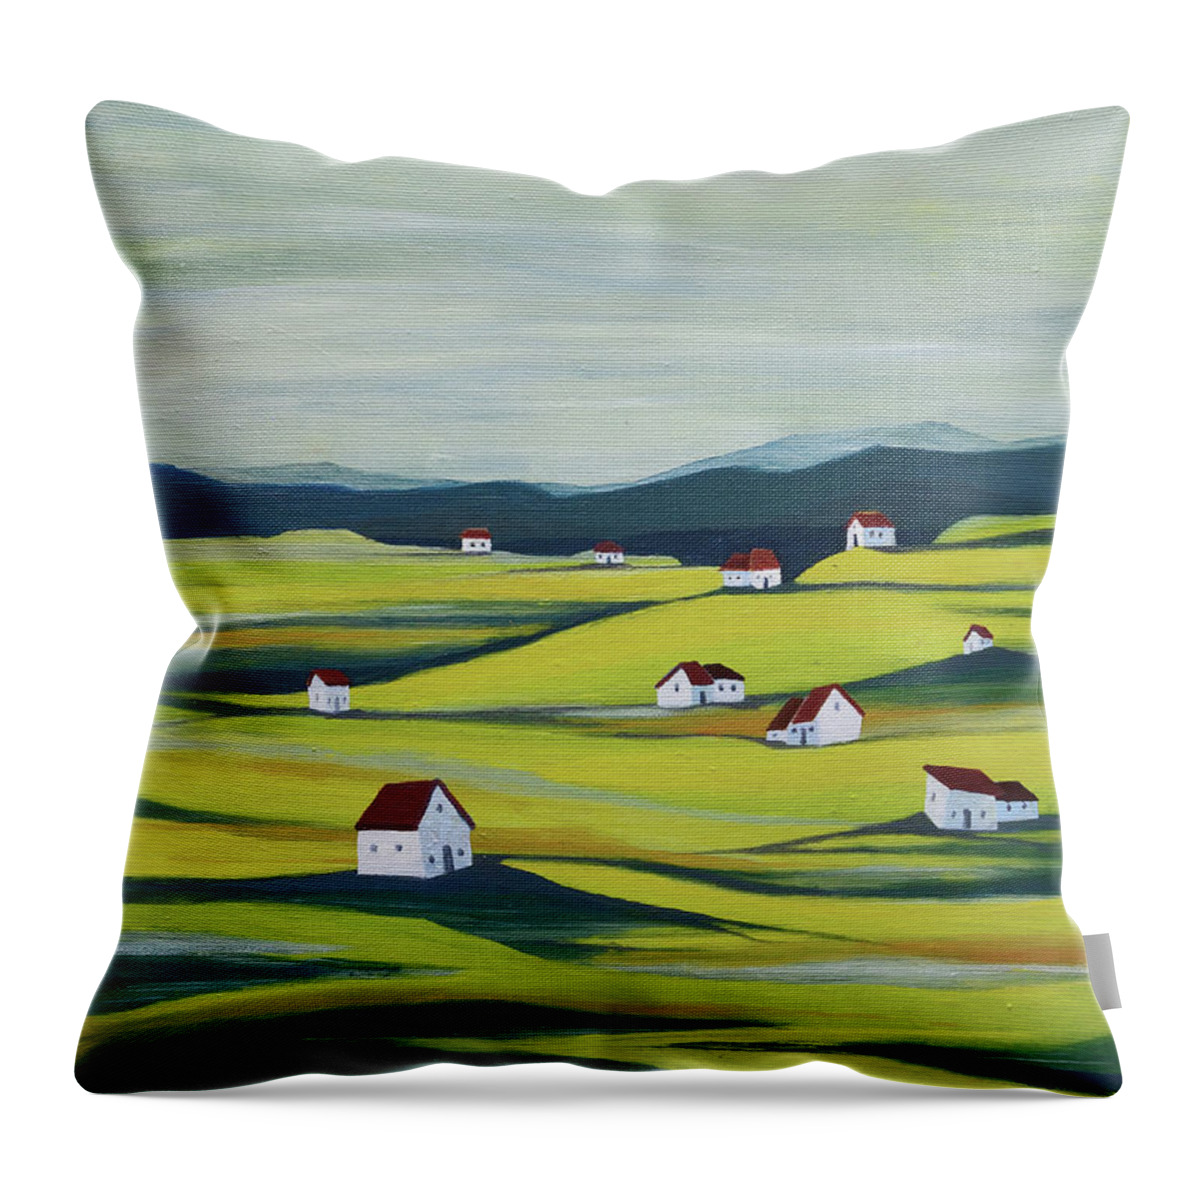 Oil On Canvas Throw Pillow featuring the painting Echoes by Aniko Hencz